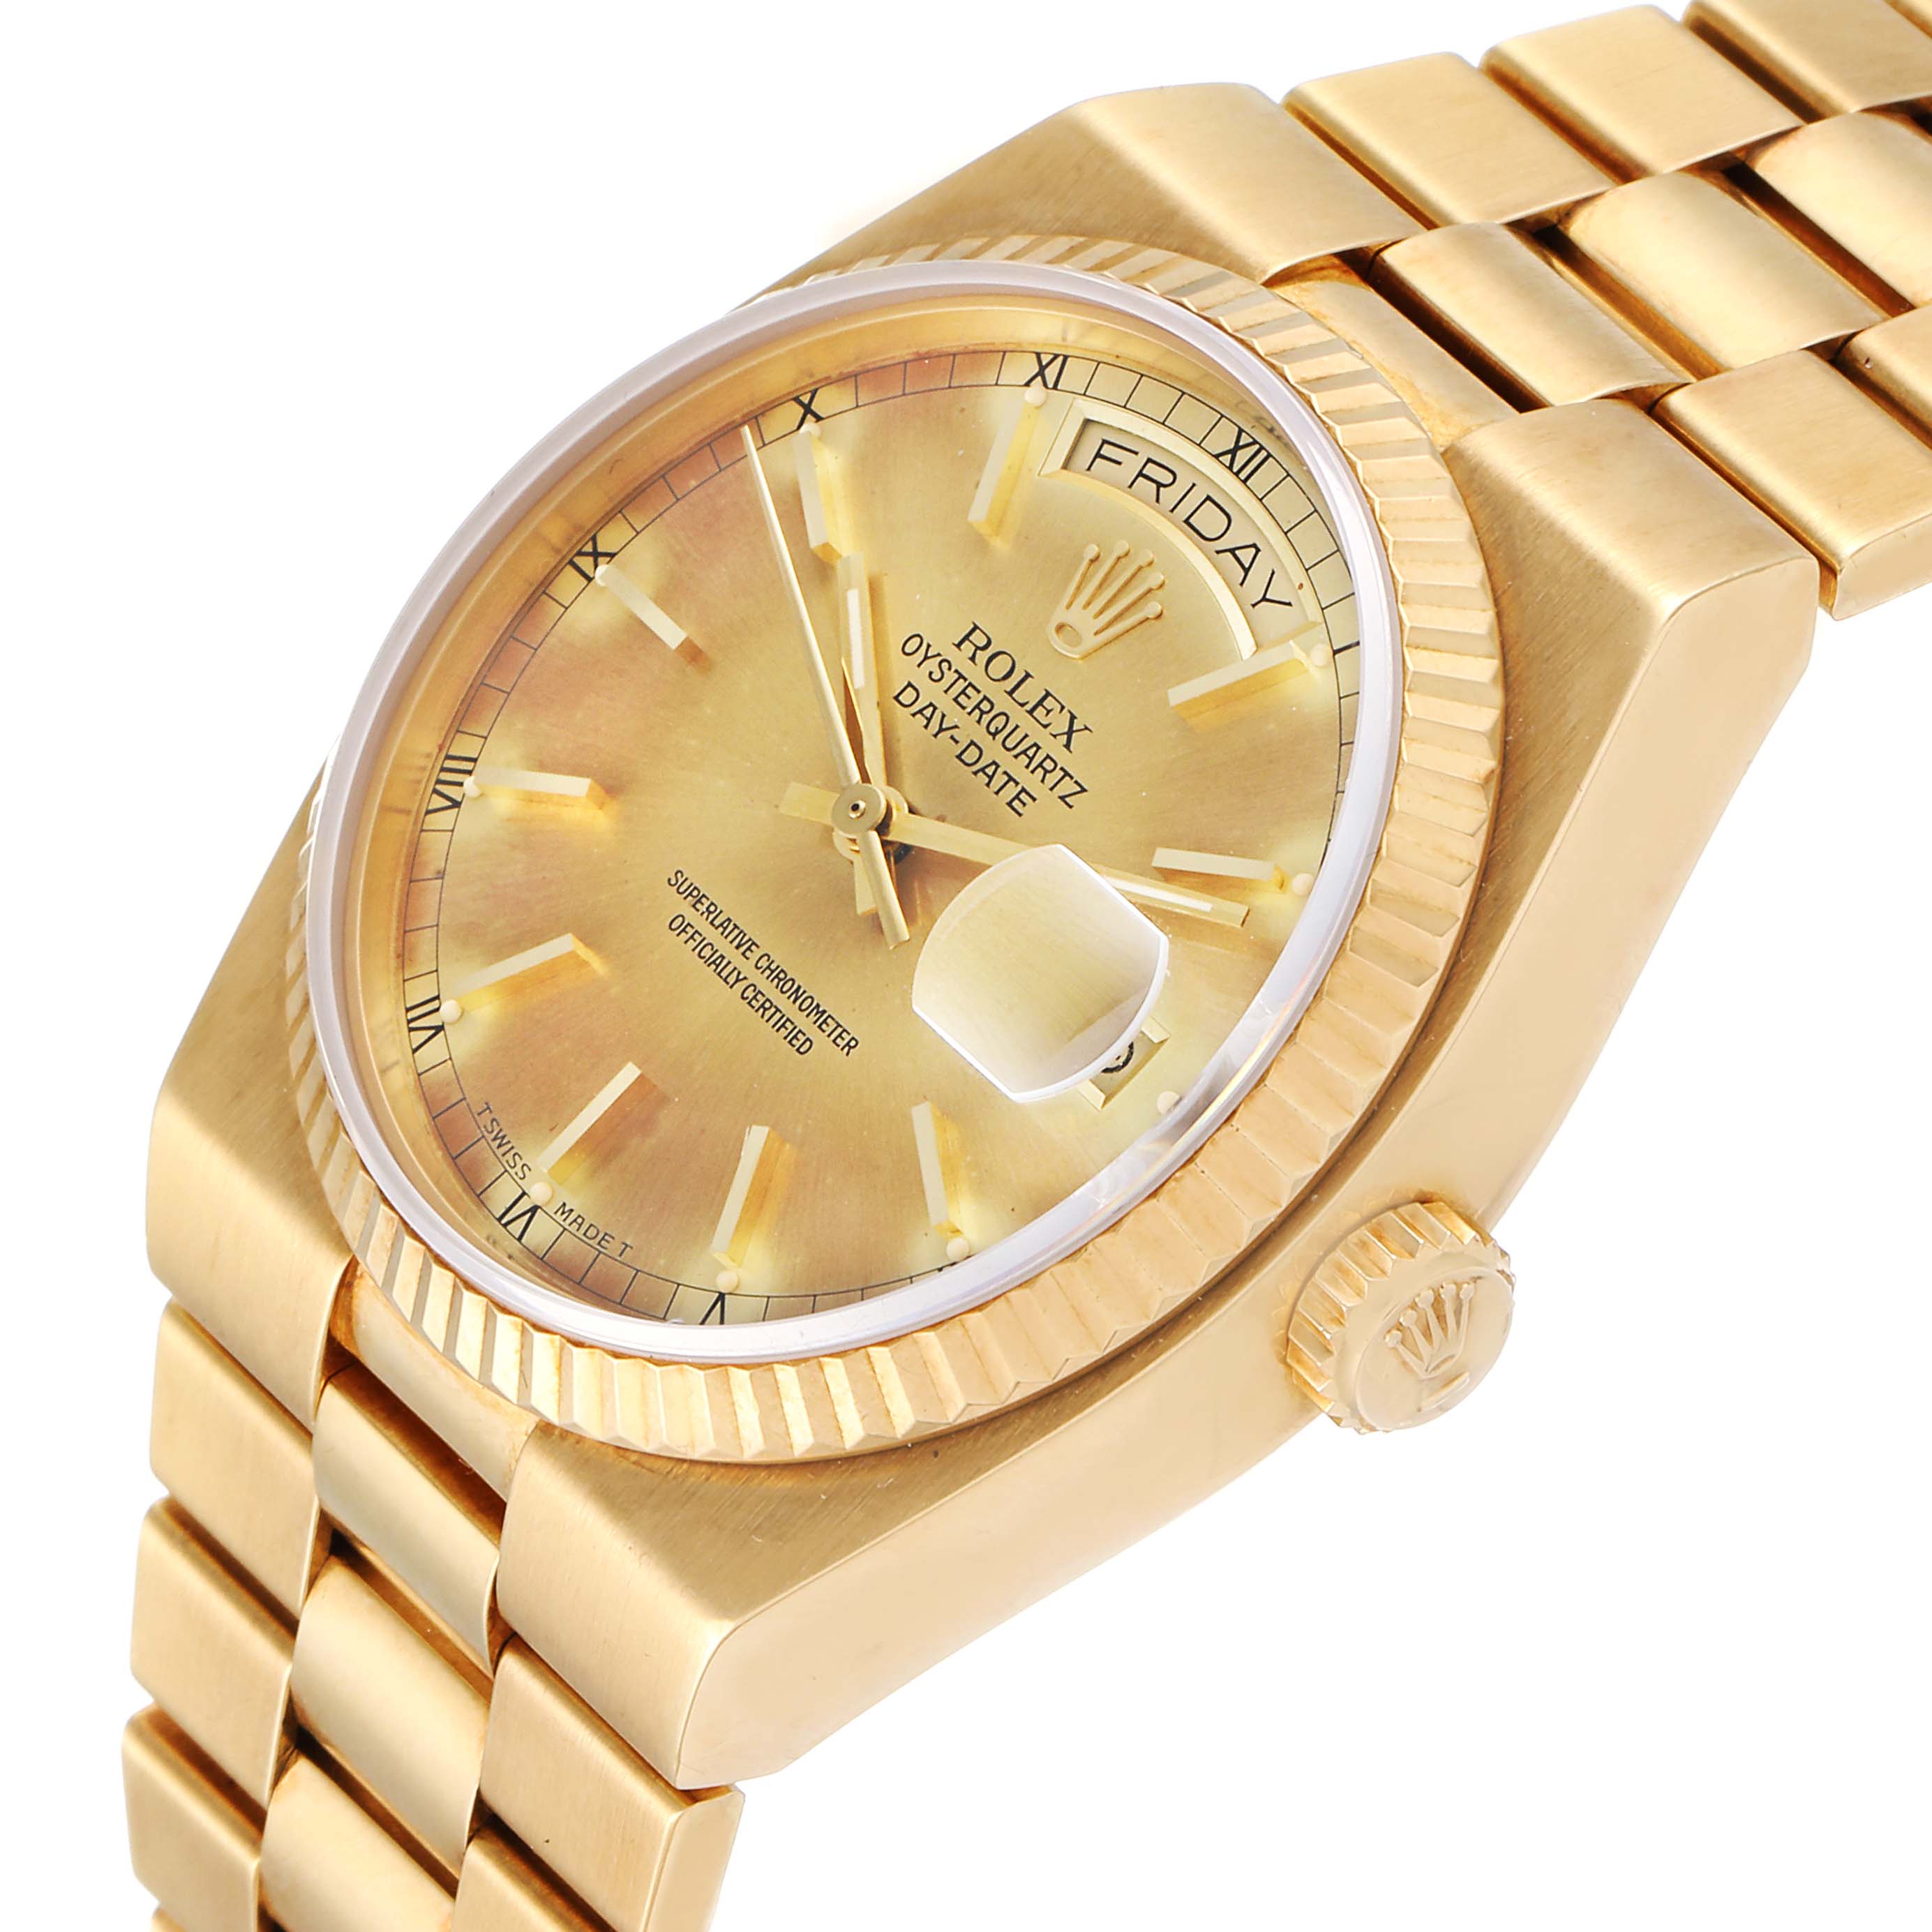 rolex oysterquartz day date superlative chronometer officially certified